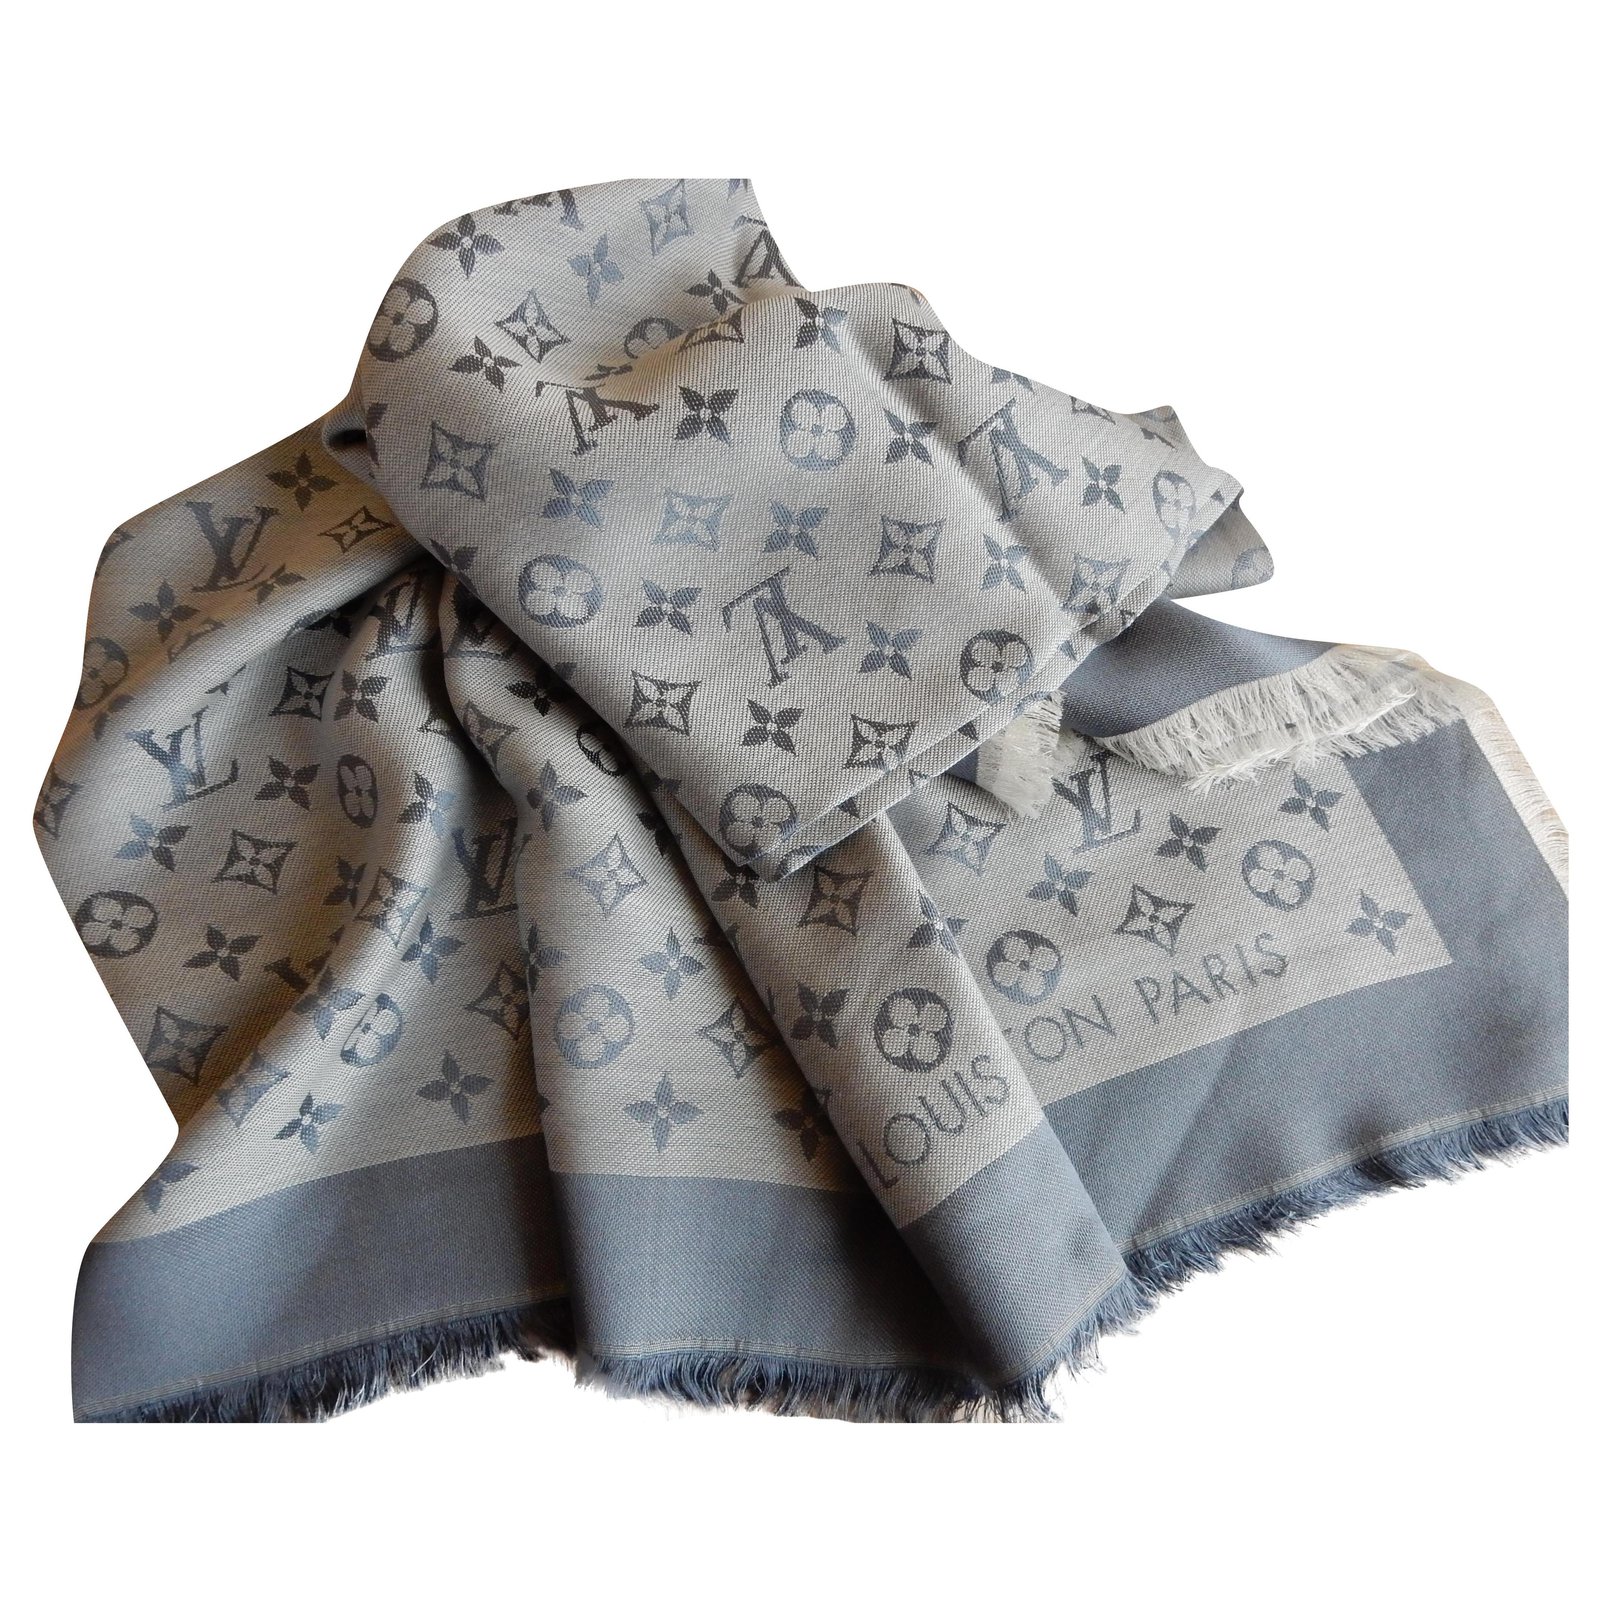 LOUIS VUITTON Patterned silk scarf in shades of blue, re…